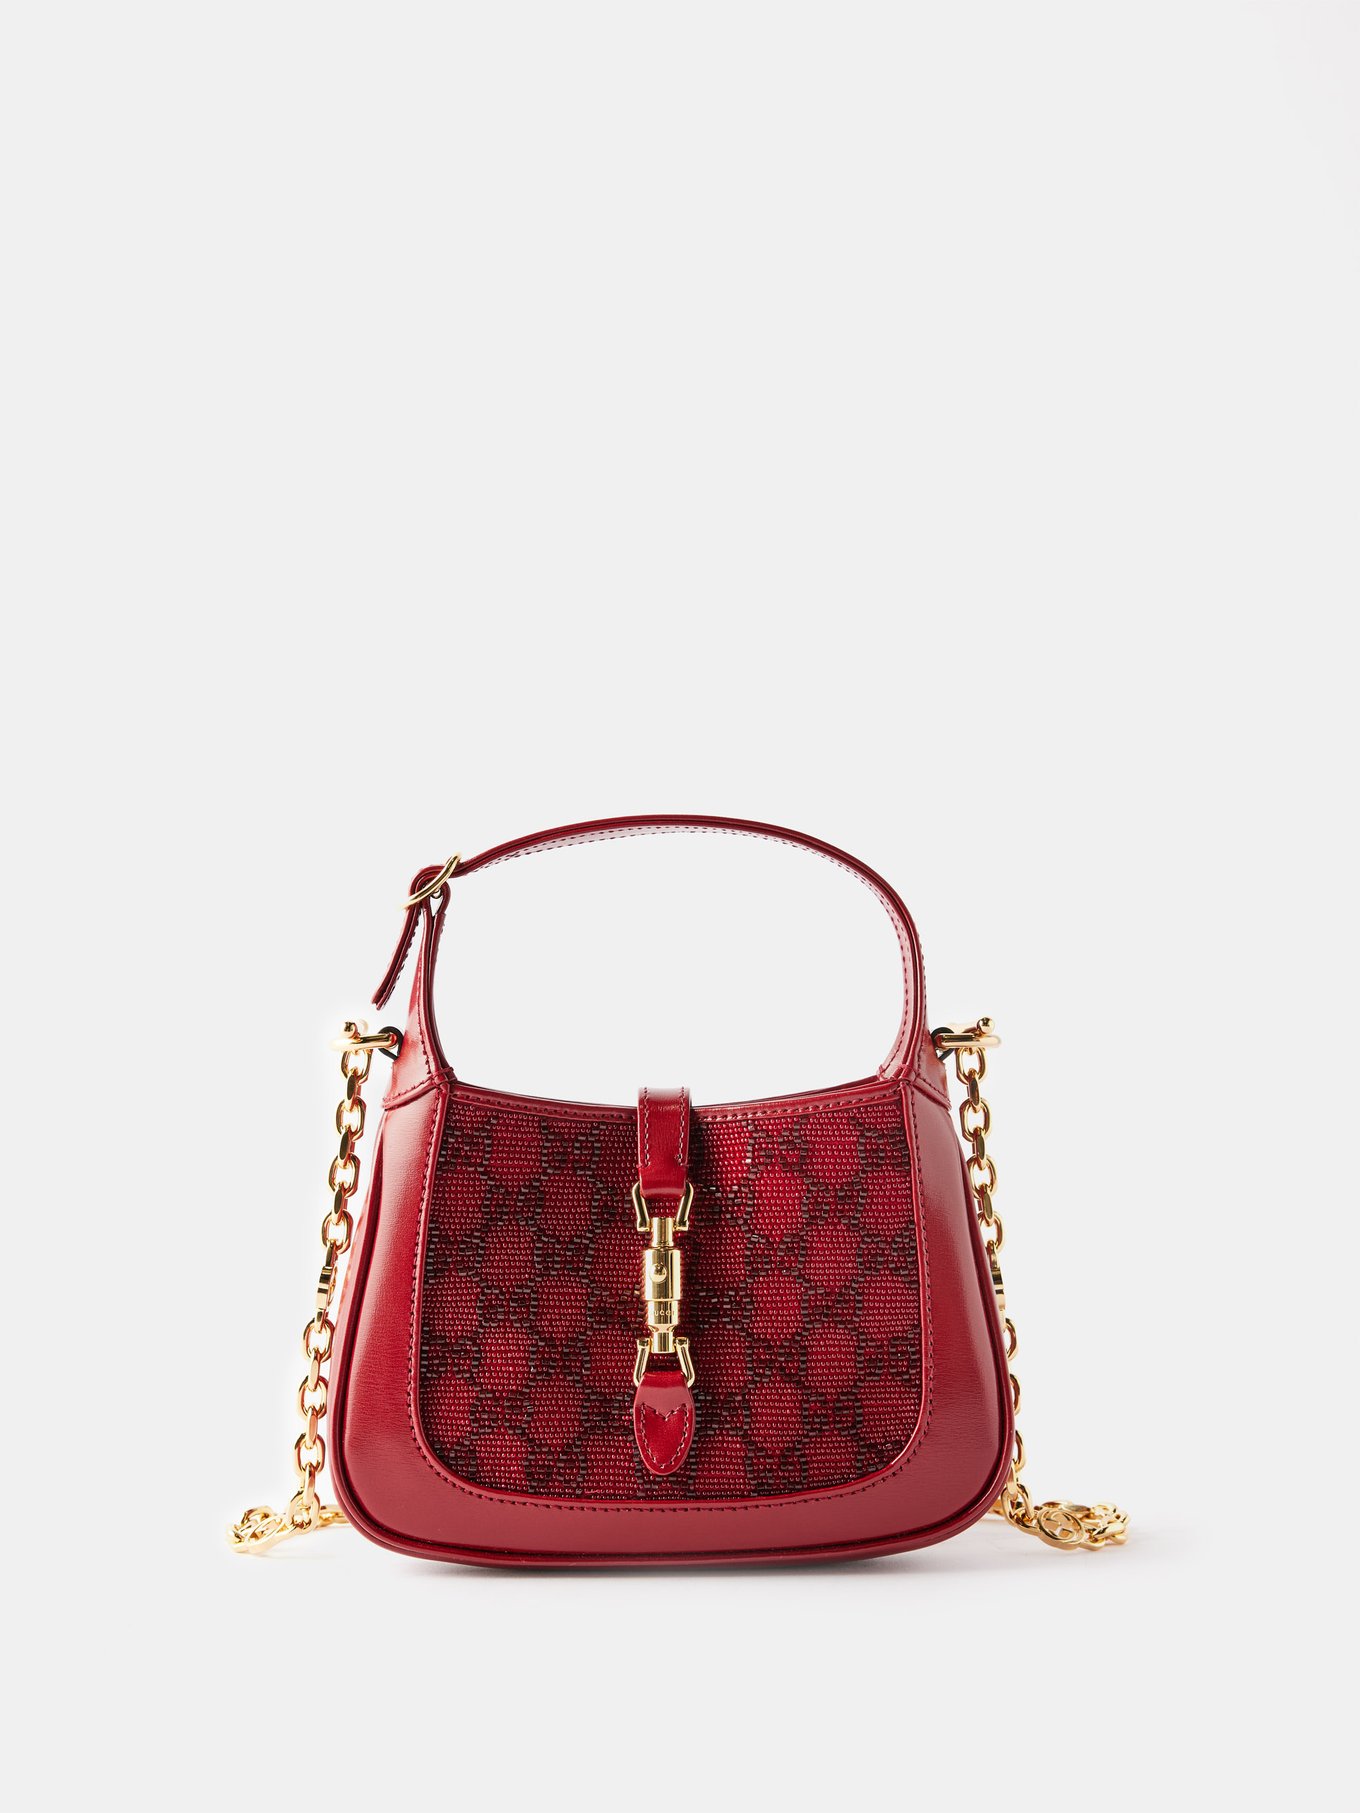 Jackie 1961 Mini Hobo Bag In Red Leather